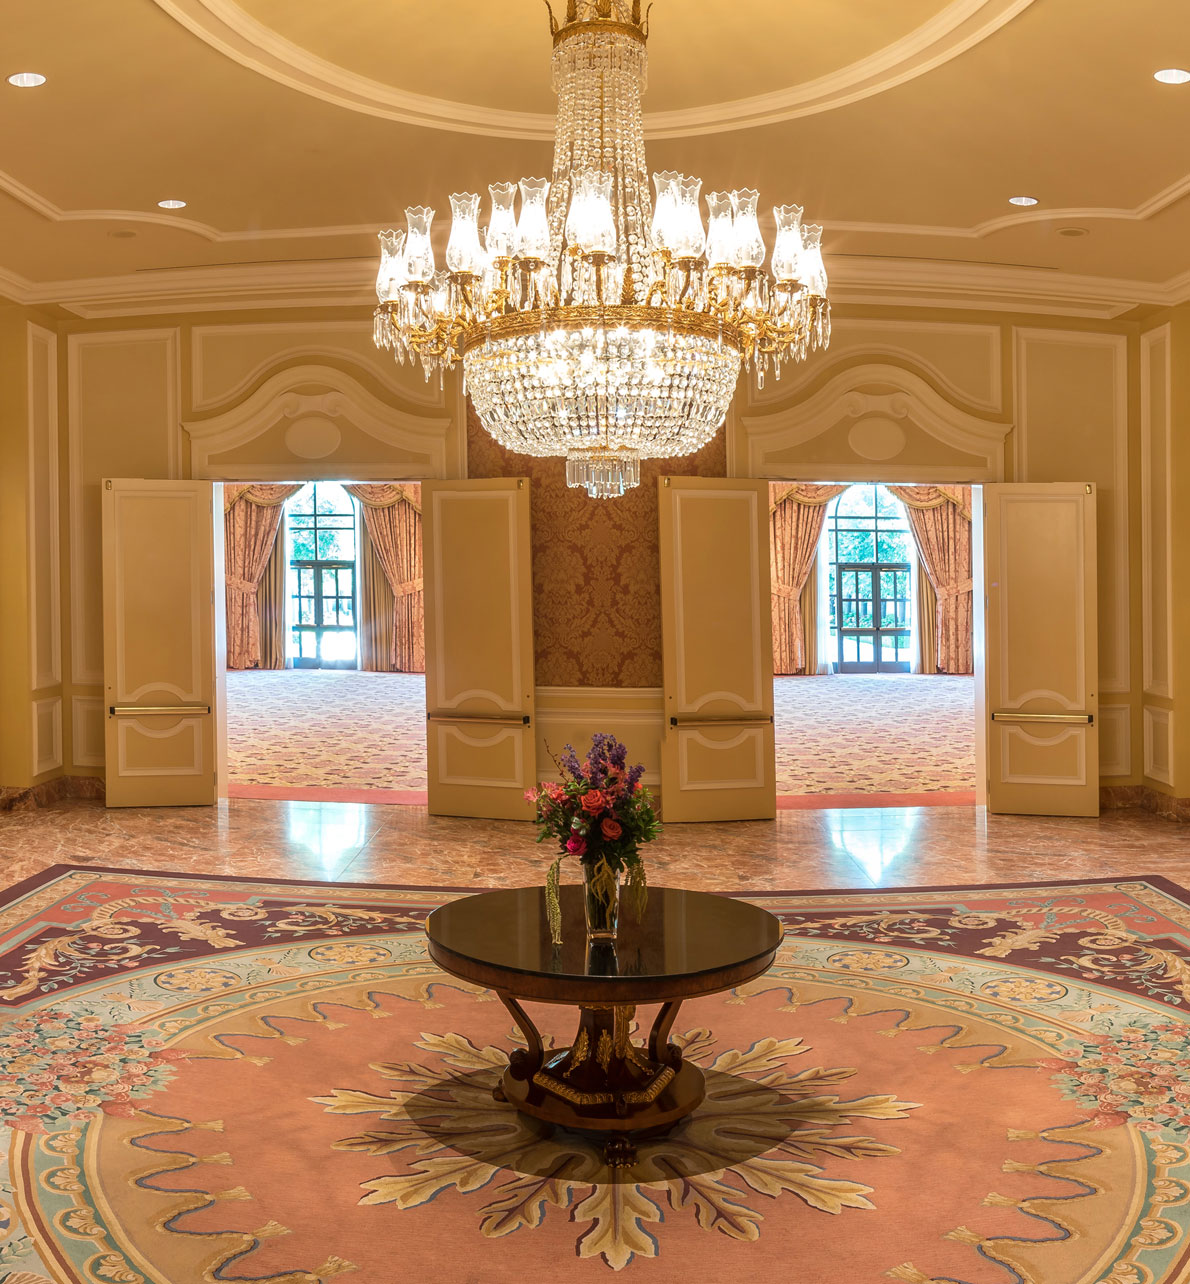 Grand Salon Reception area at the Grand America Hotel featuring pink marble and glass chandeliers.